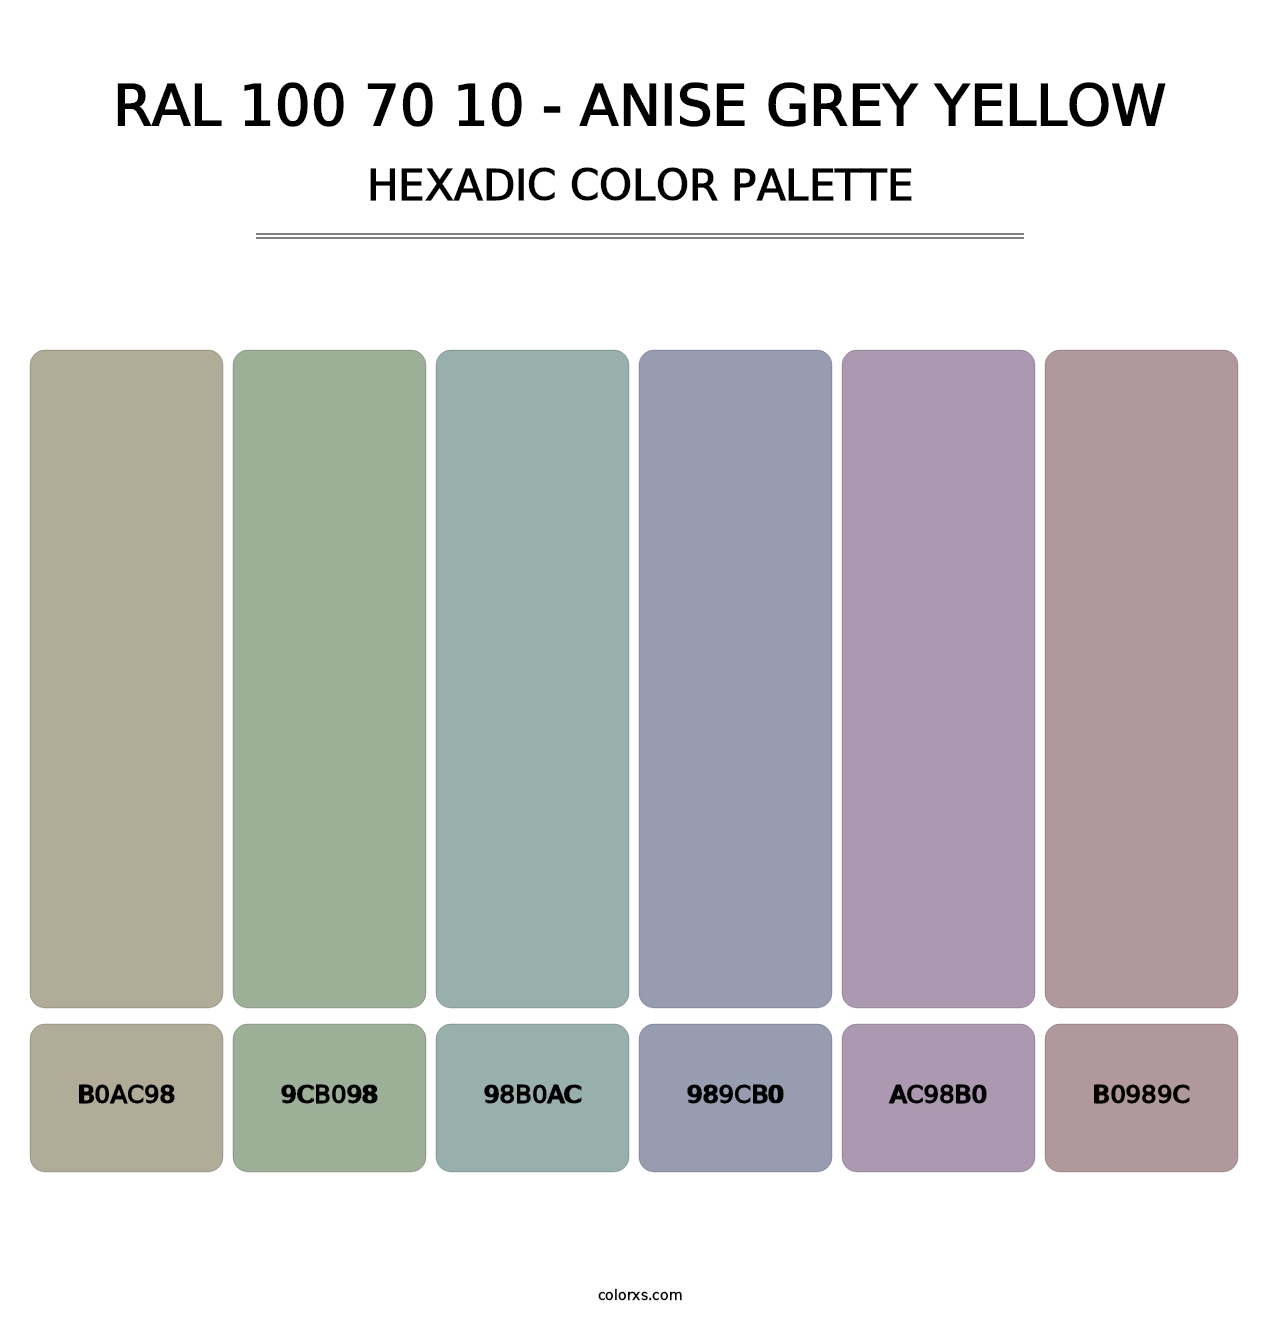 RAL 100 70 10 - Anise Grey Yellow - Hexadic Color Palette